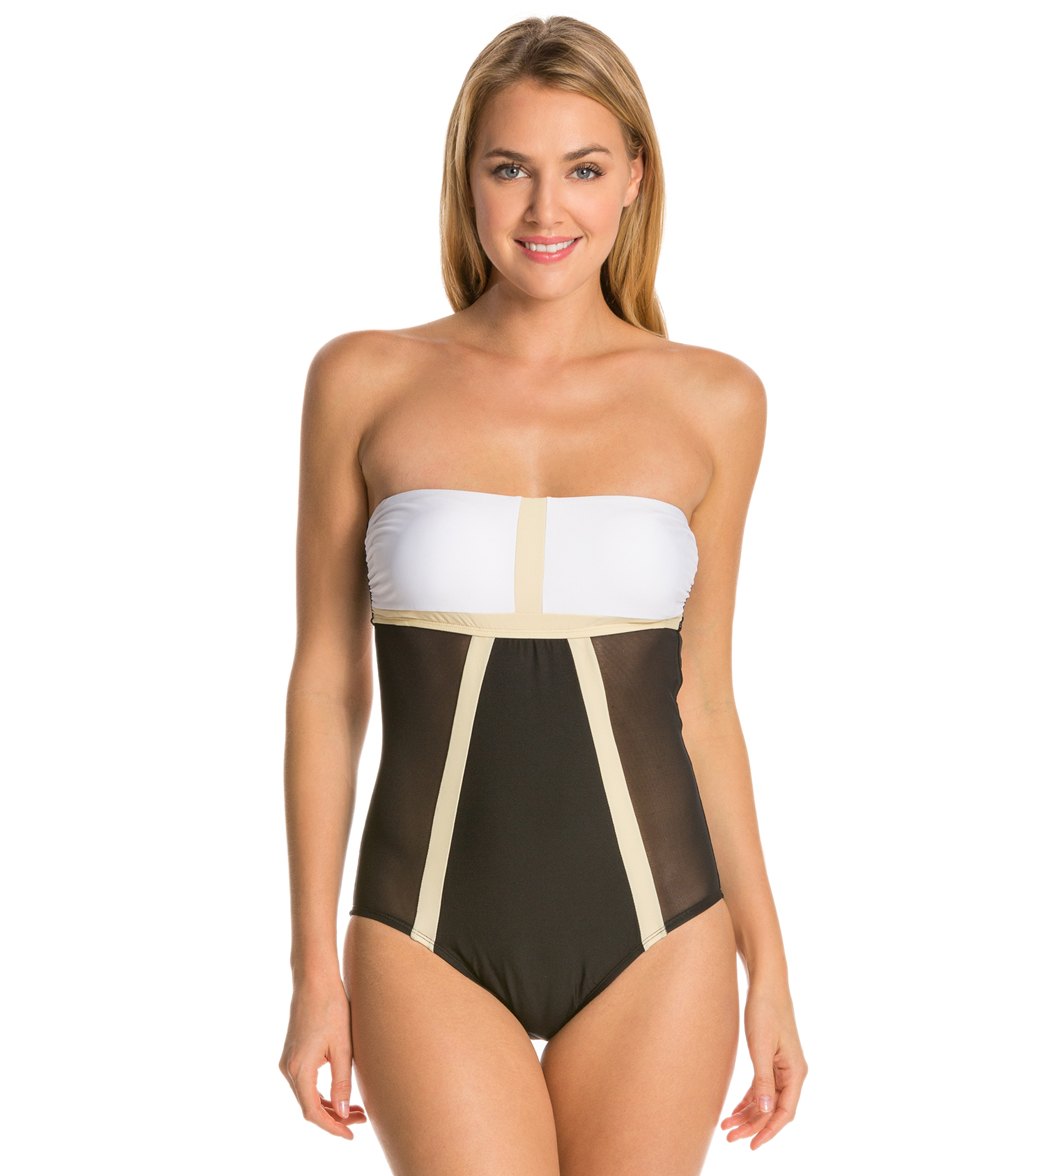 Luxe By Lisa Vogel Mrs. Bond Bandeau Maillot - White/Sand/Onyx 8 - Swimoutlet.com